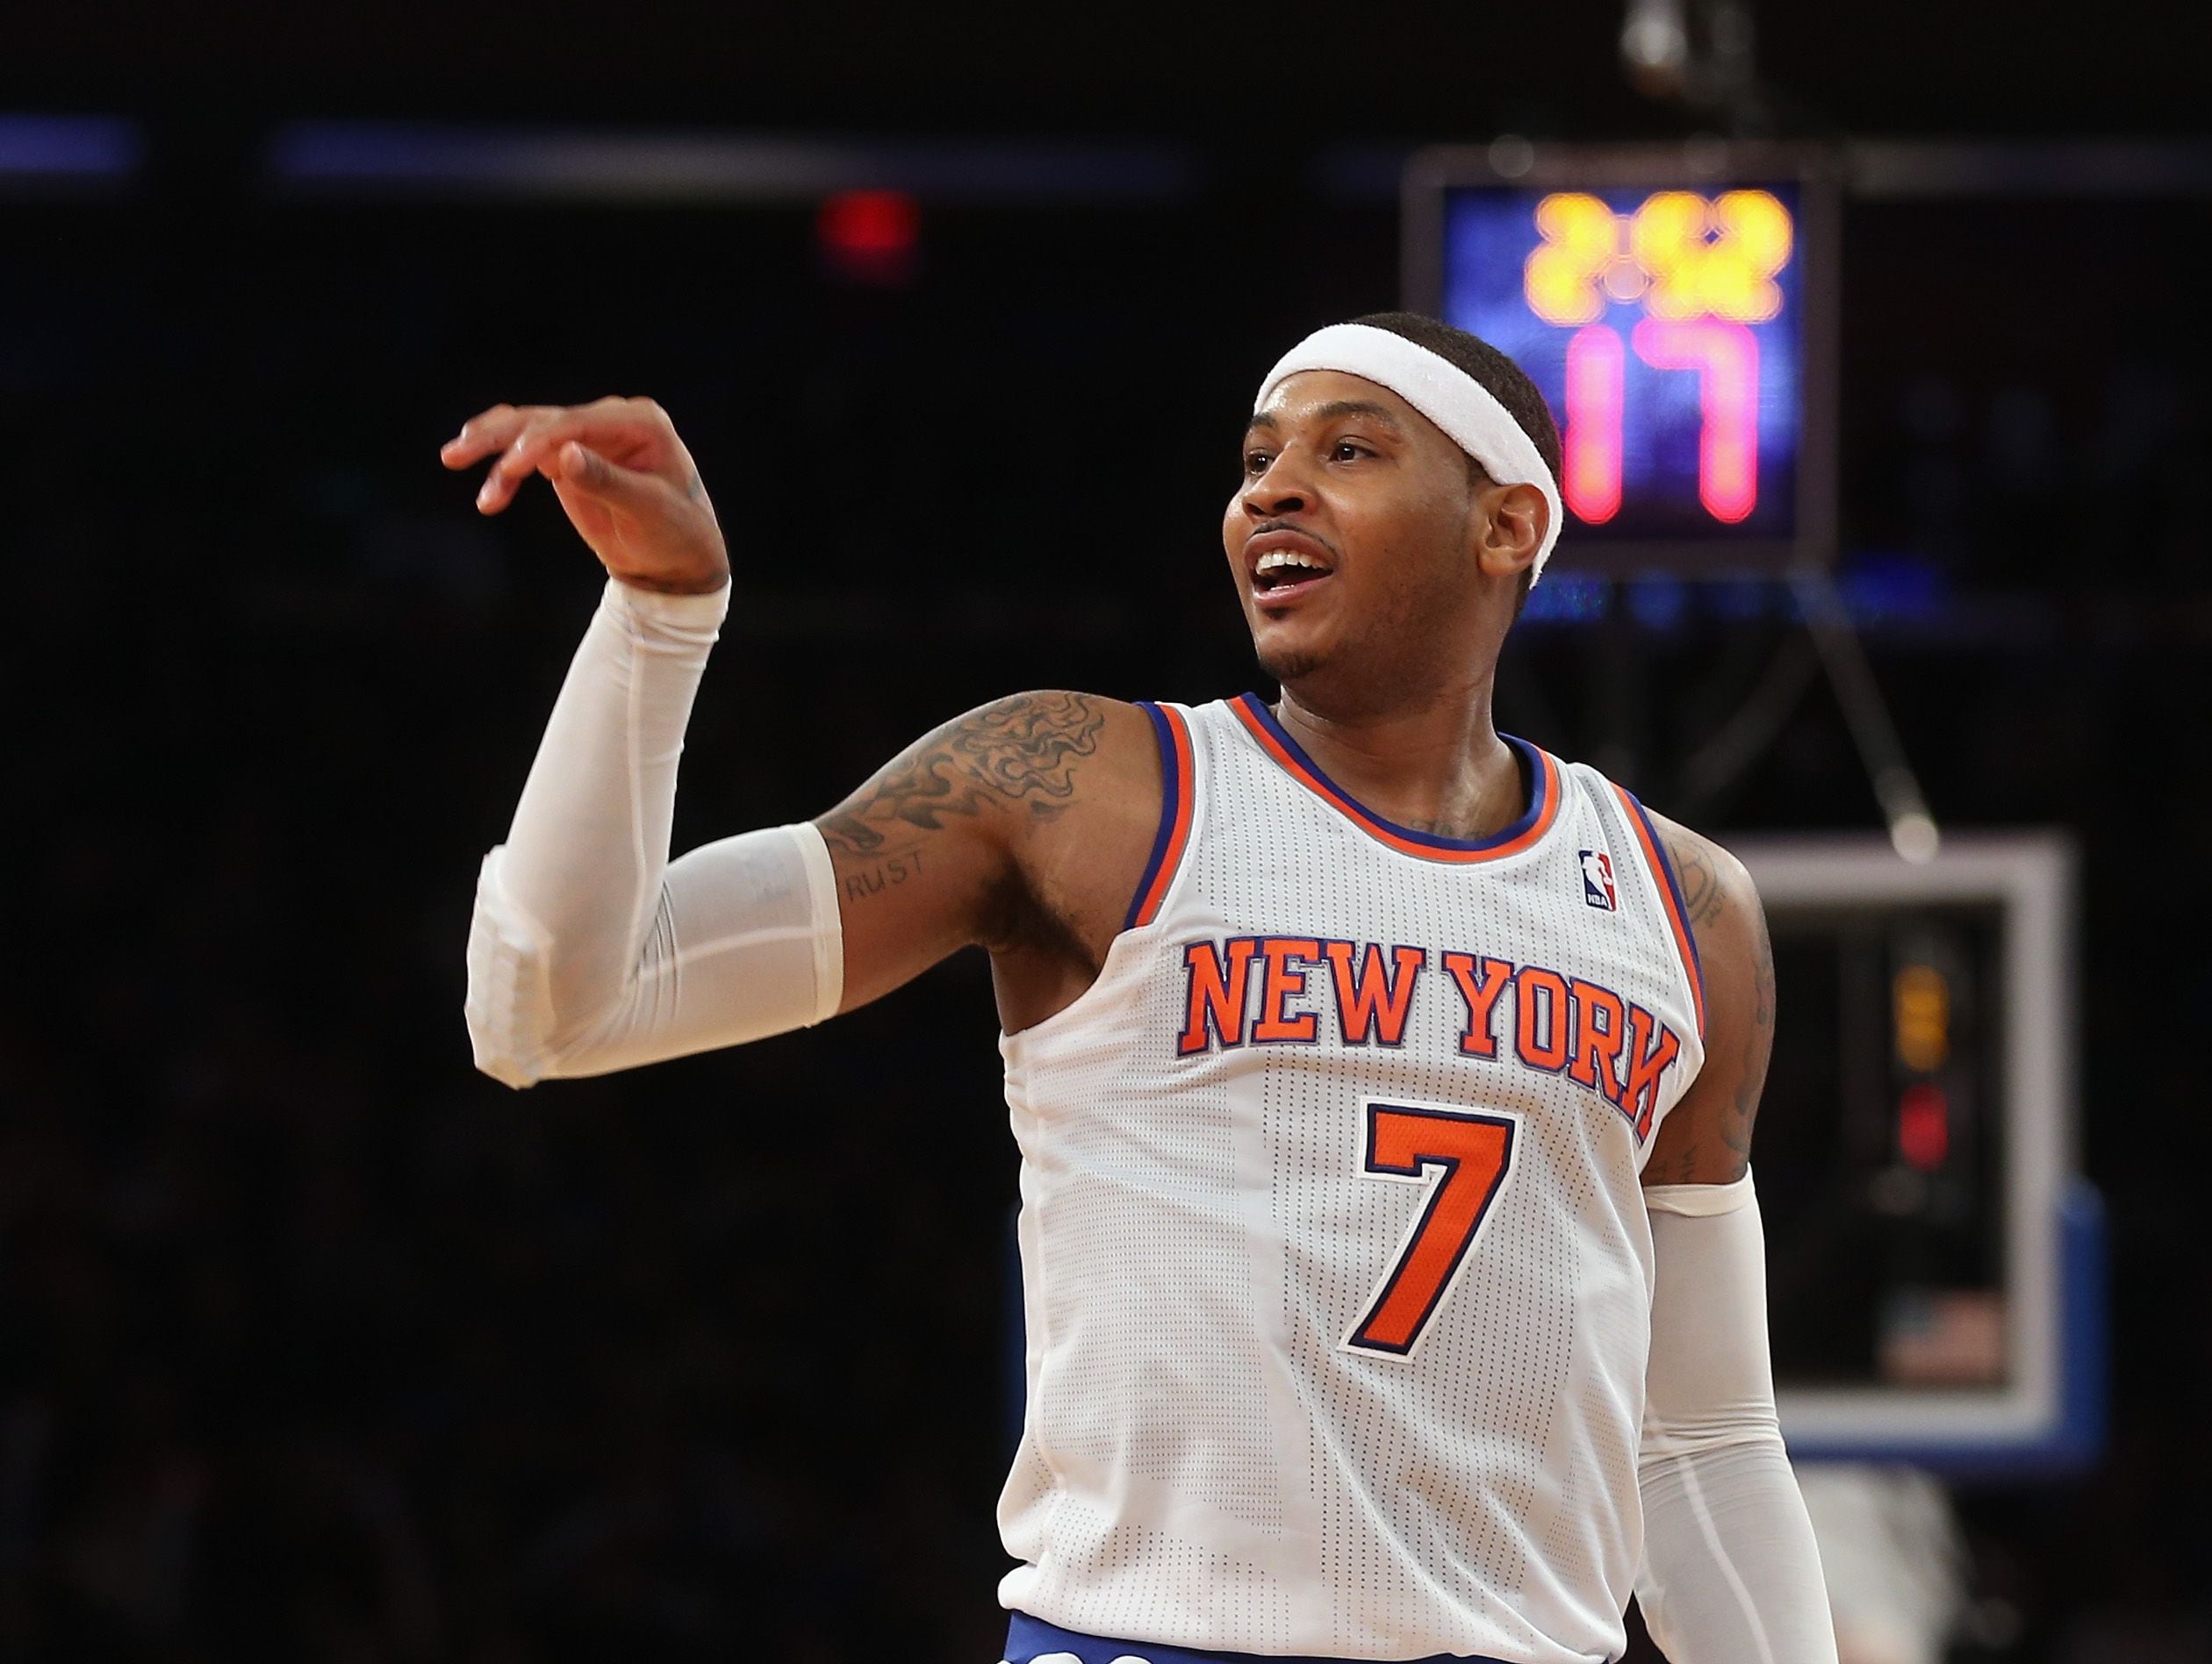 Lakers' LeBron James pays tribute to Carmelo Anthony after retirement